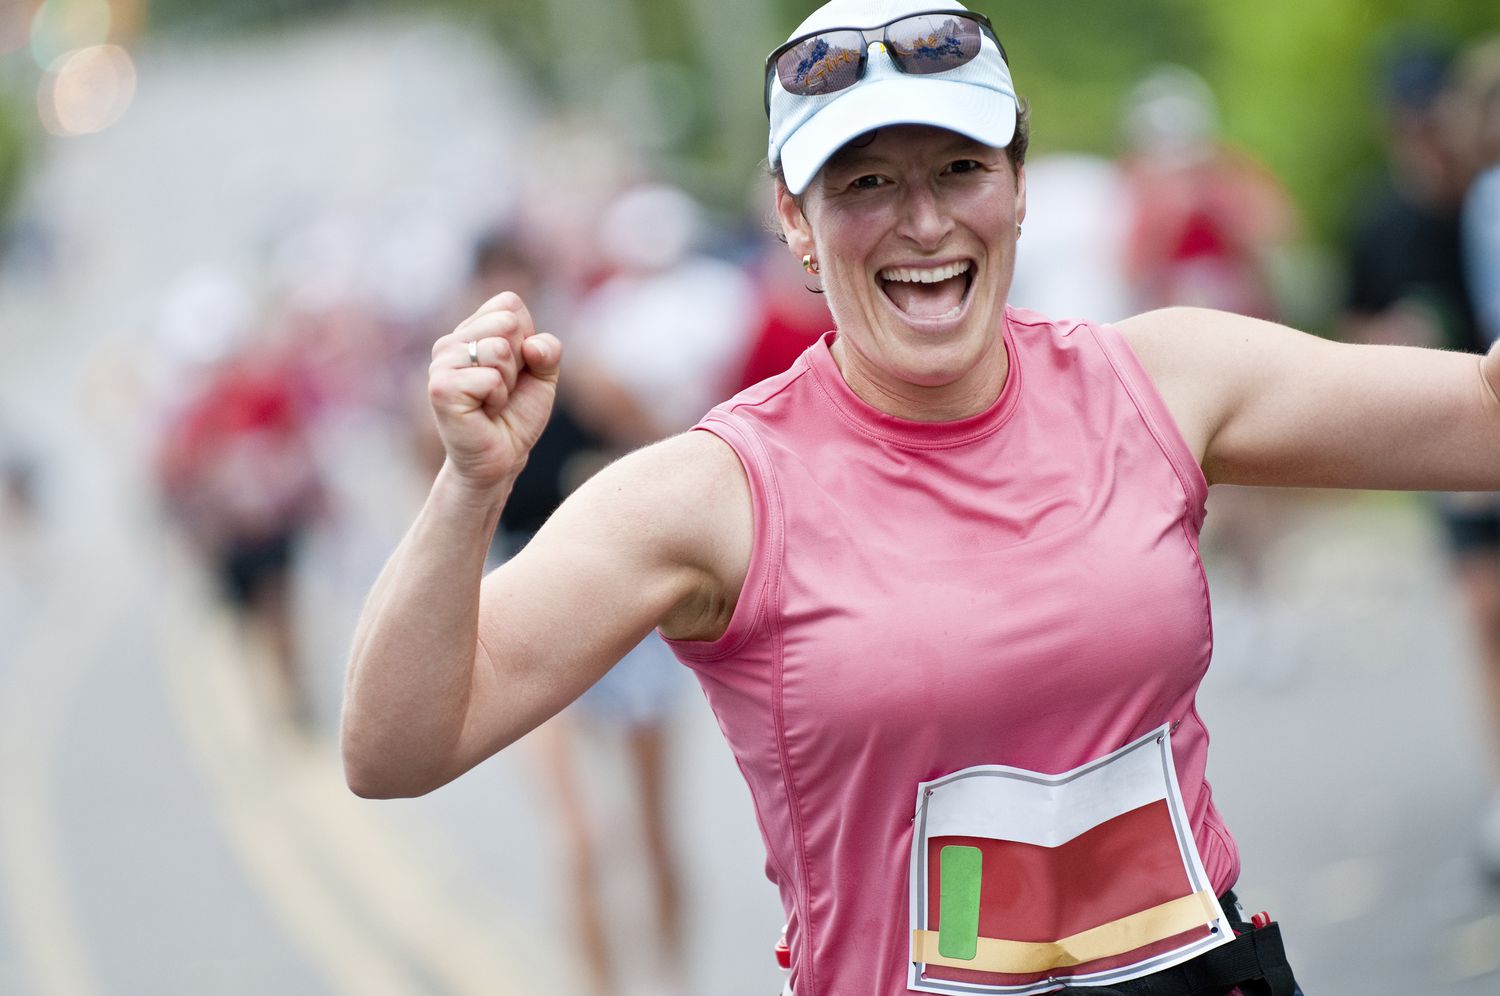 Woman smiles broadly and pumps her fists in celebration having completed first 30 of 42 kilometers in her first marathon race.